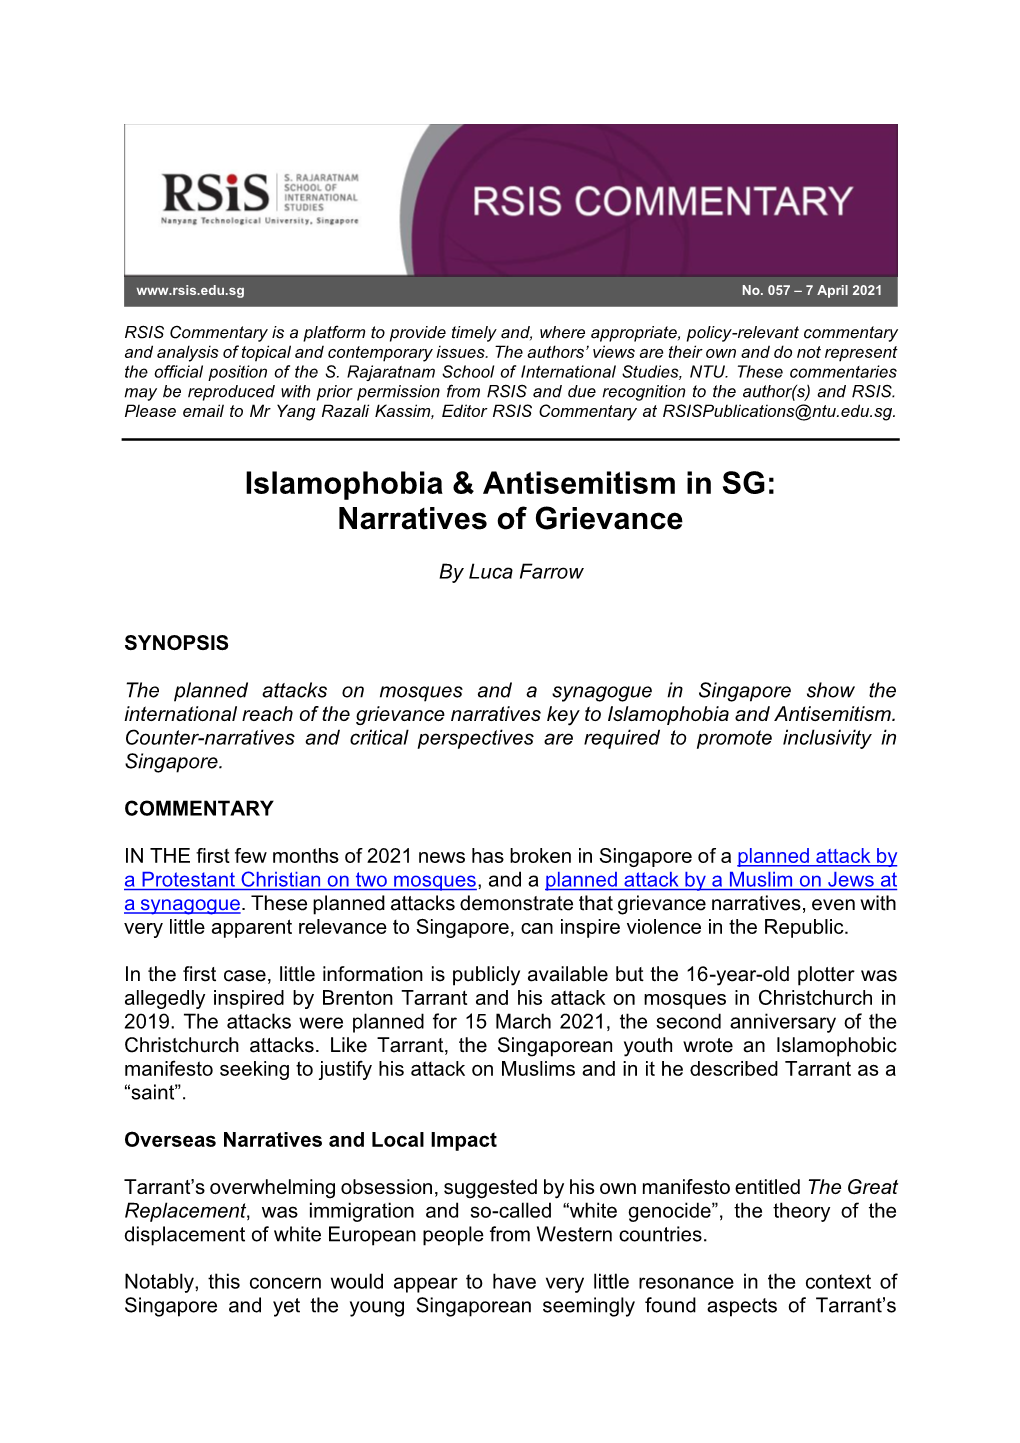 Islamophobia & Antisemitism in SG: Narratives of Grievance